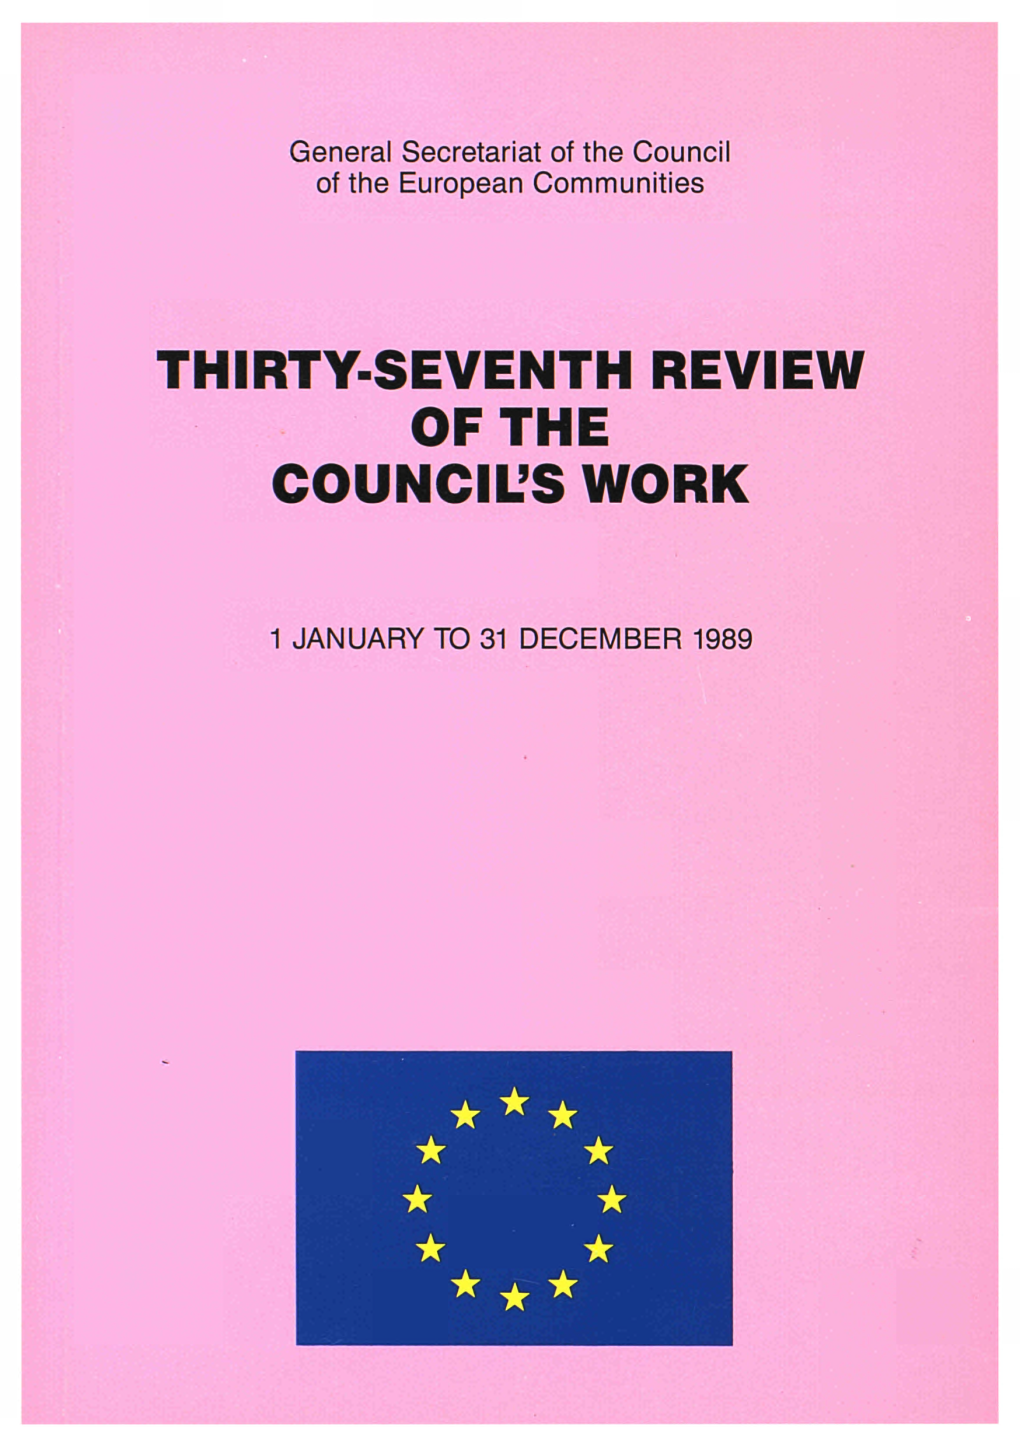 Thirty-Seventh Review of the Council's Work